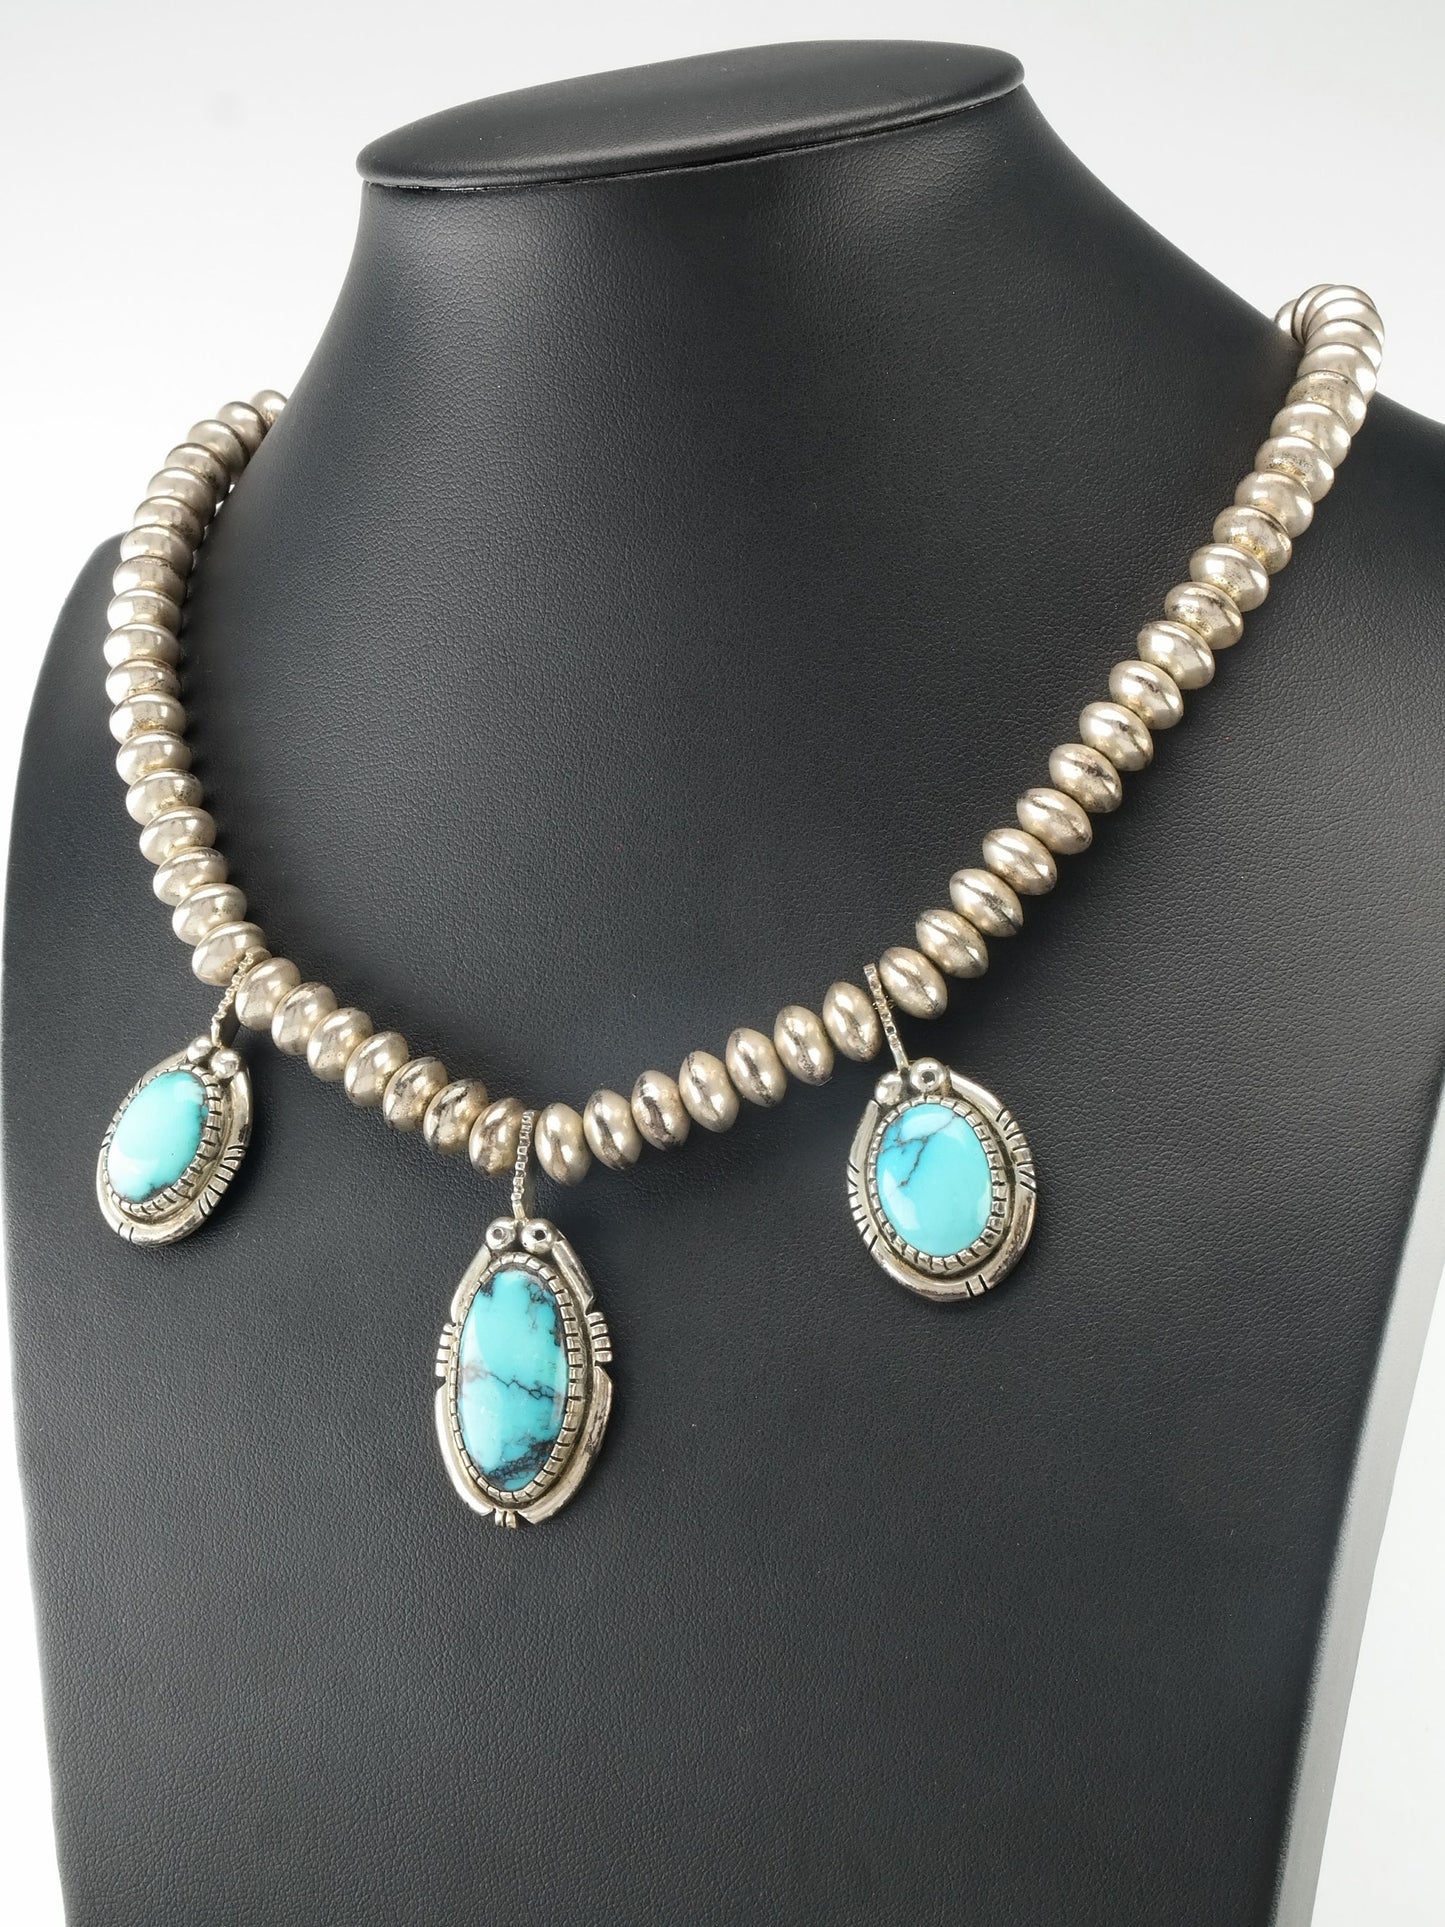 Vintage Tim Guerro Sterling Silver necklace Blue Triple Turquoise stones Hogan Beads